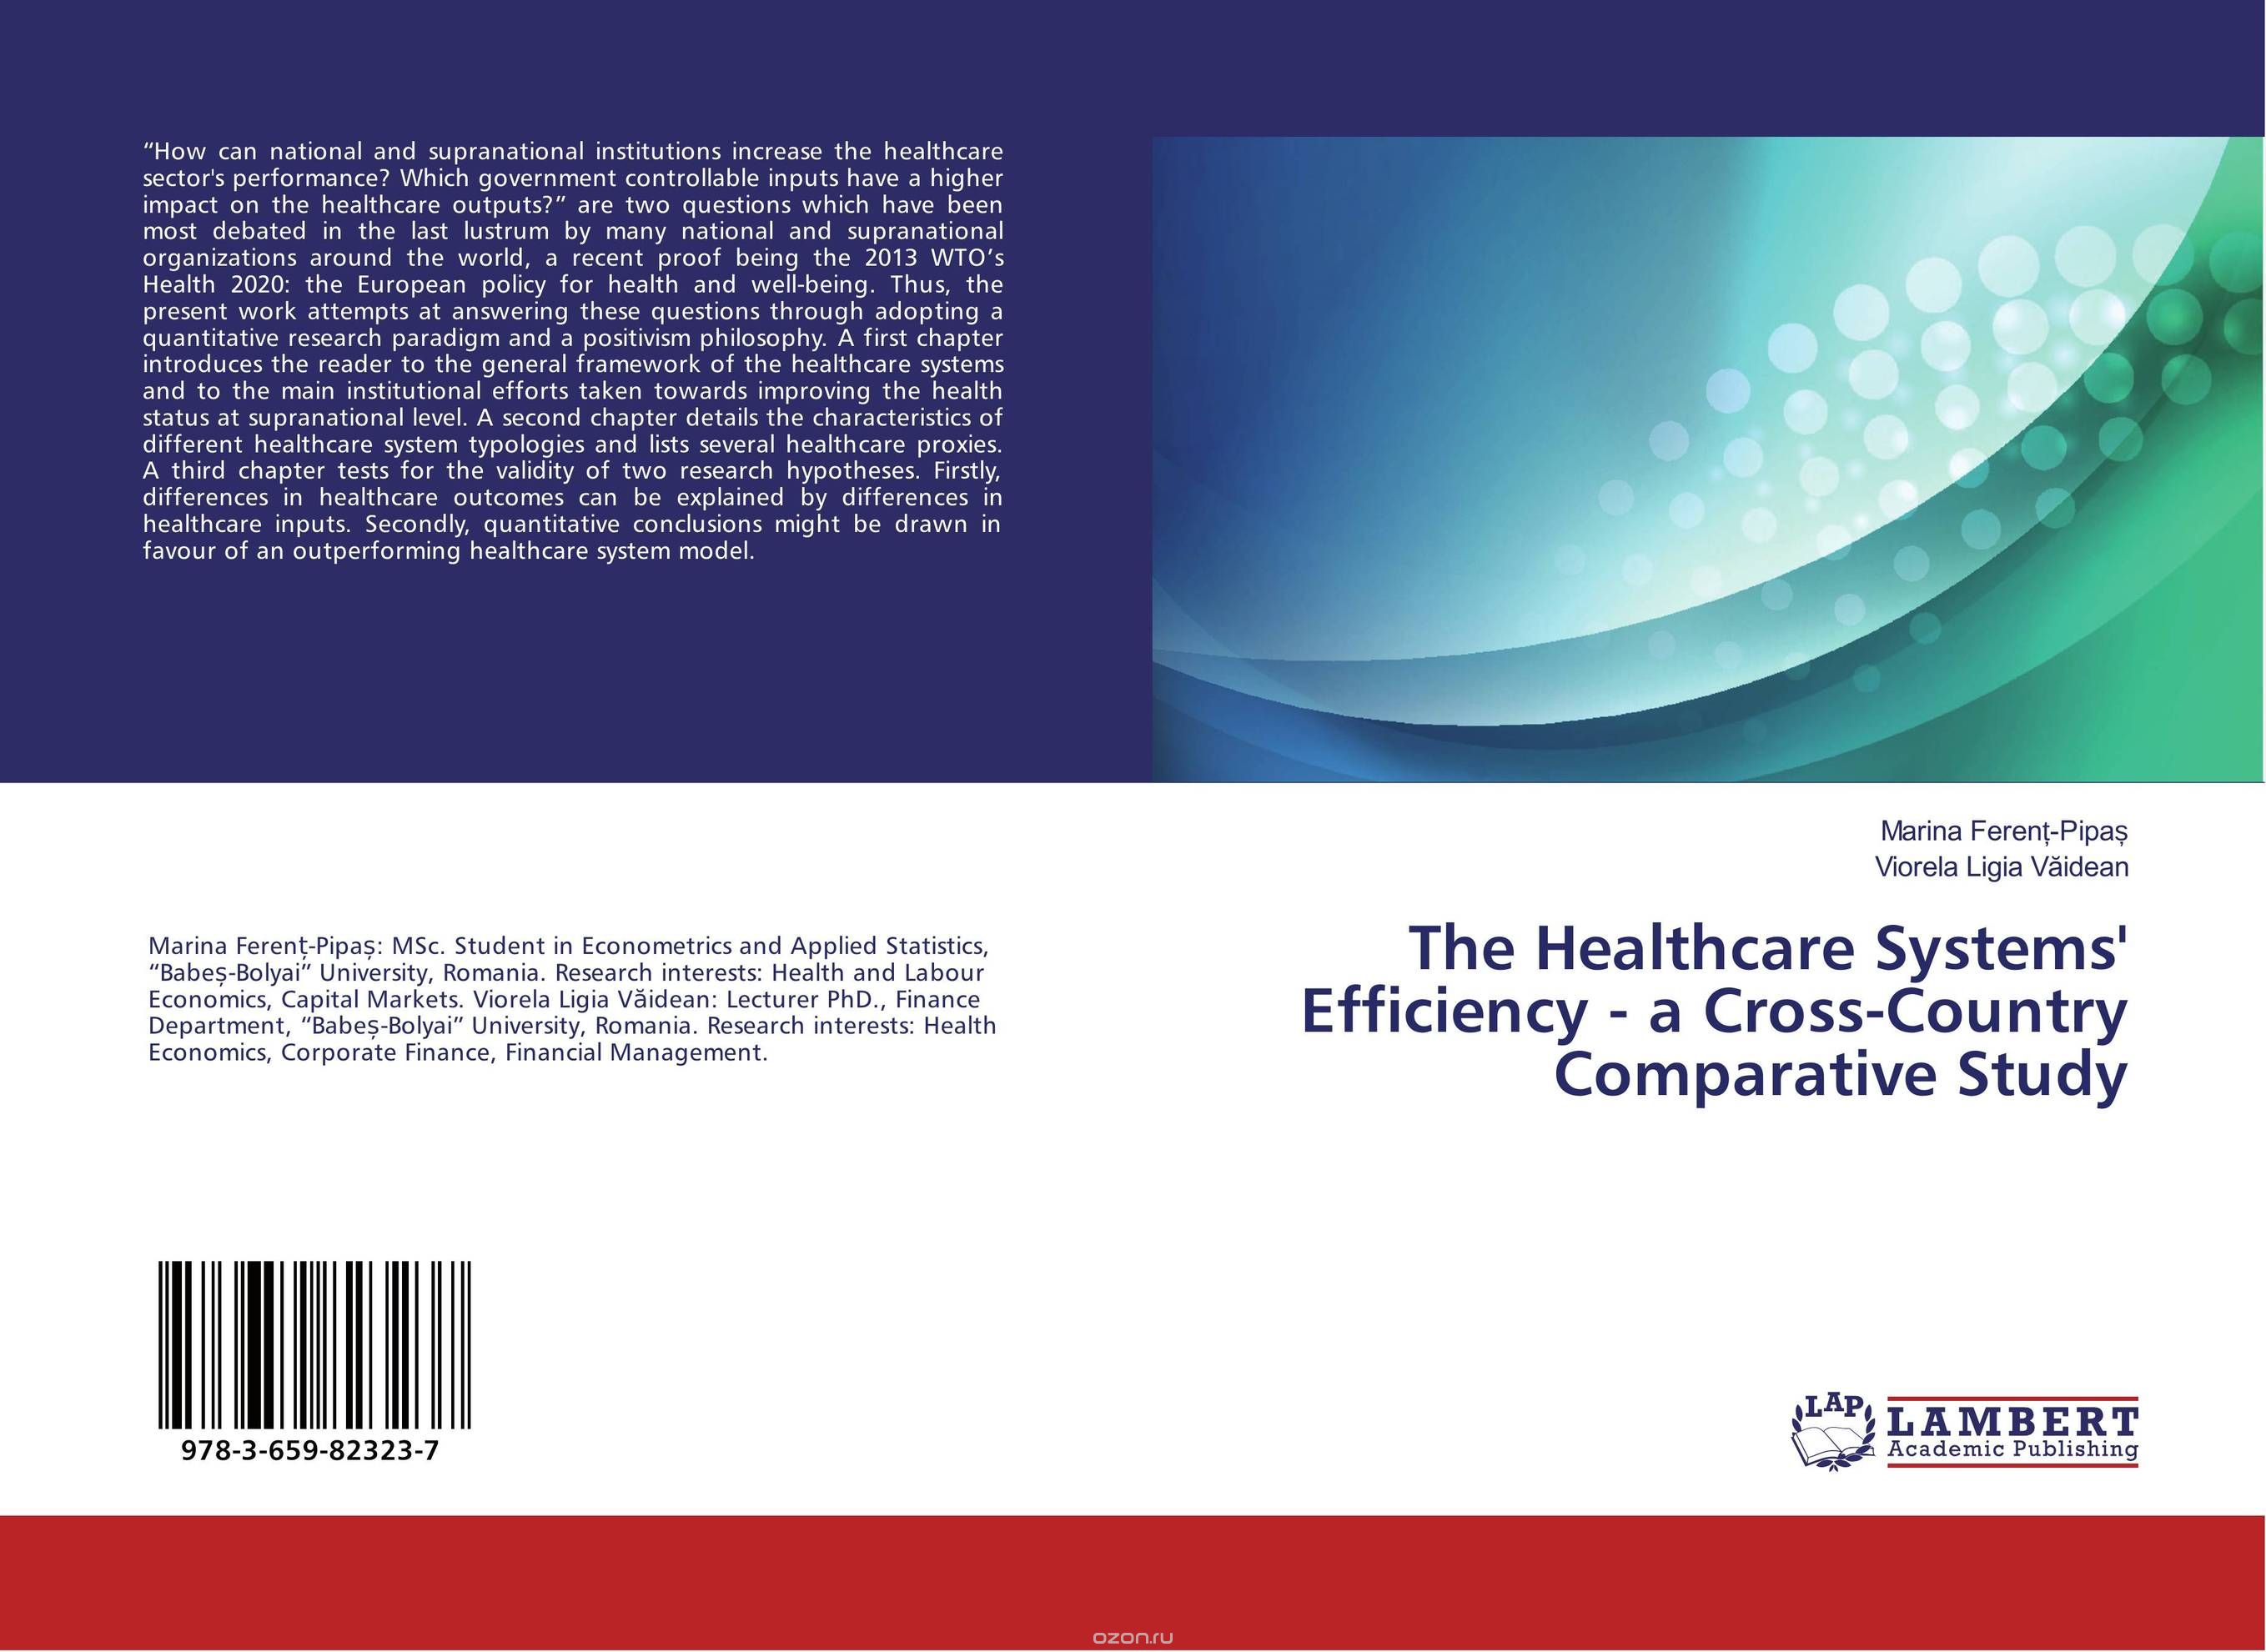 The Healthcare Systems' Efficiency - a Cross-Country Comparative Study